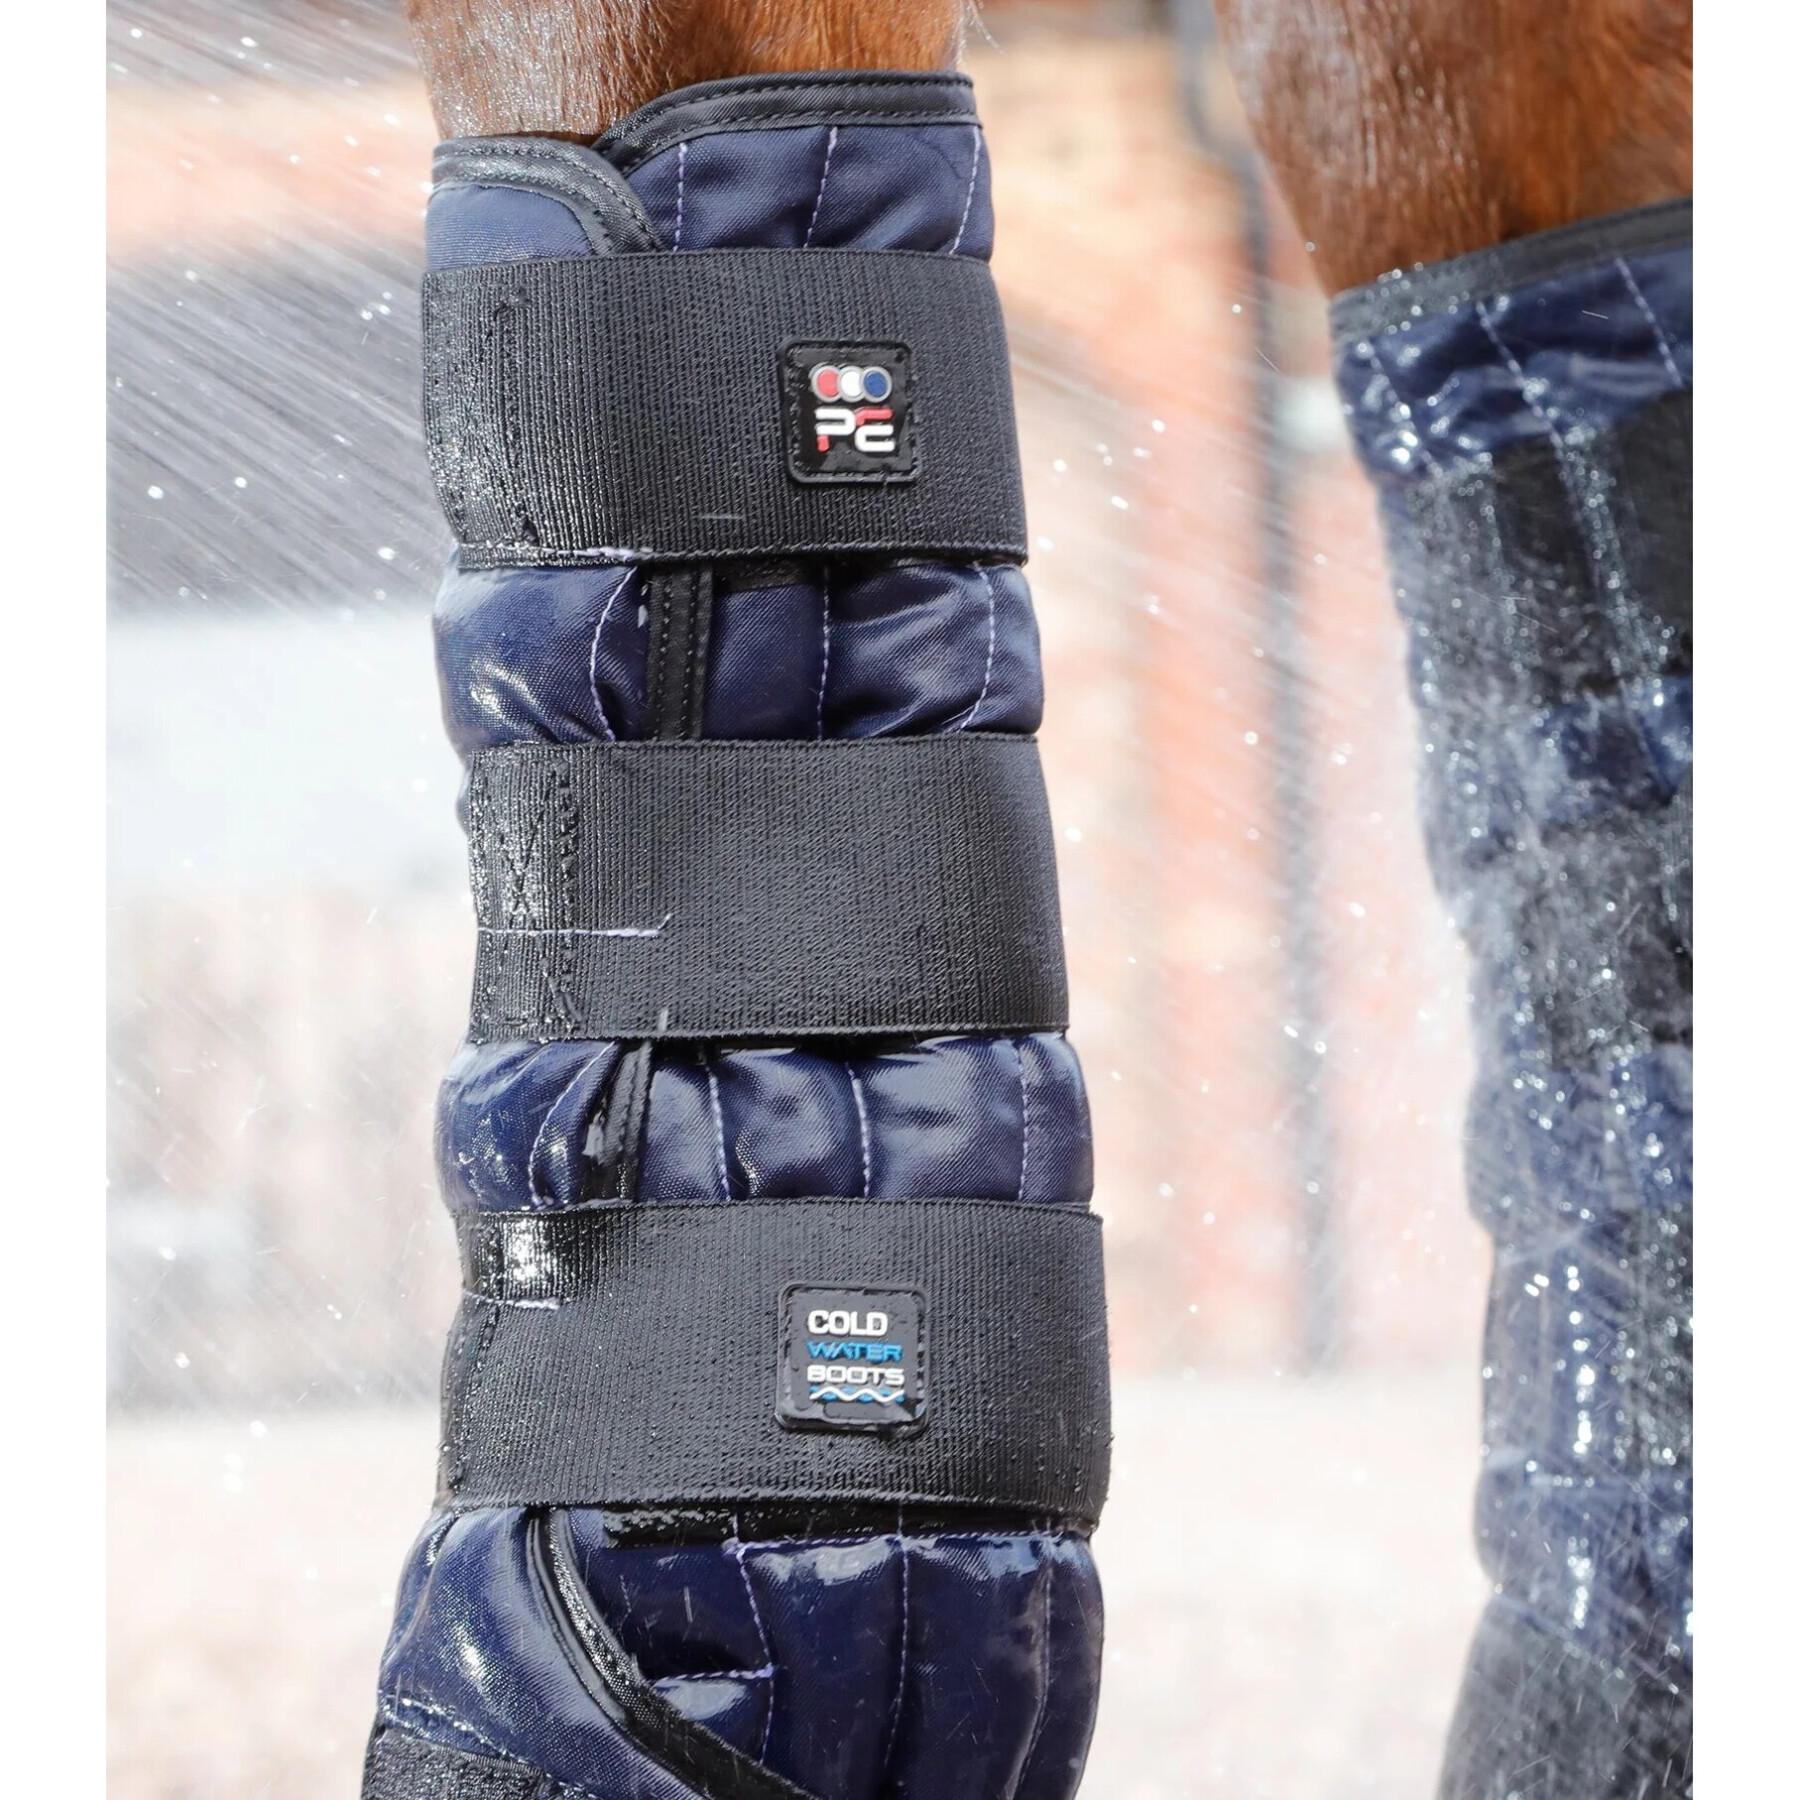 Cold water horse gaiters premier Equine